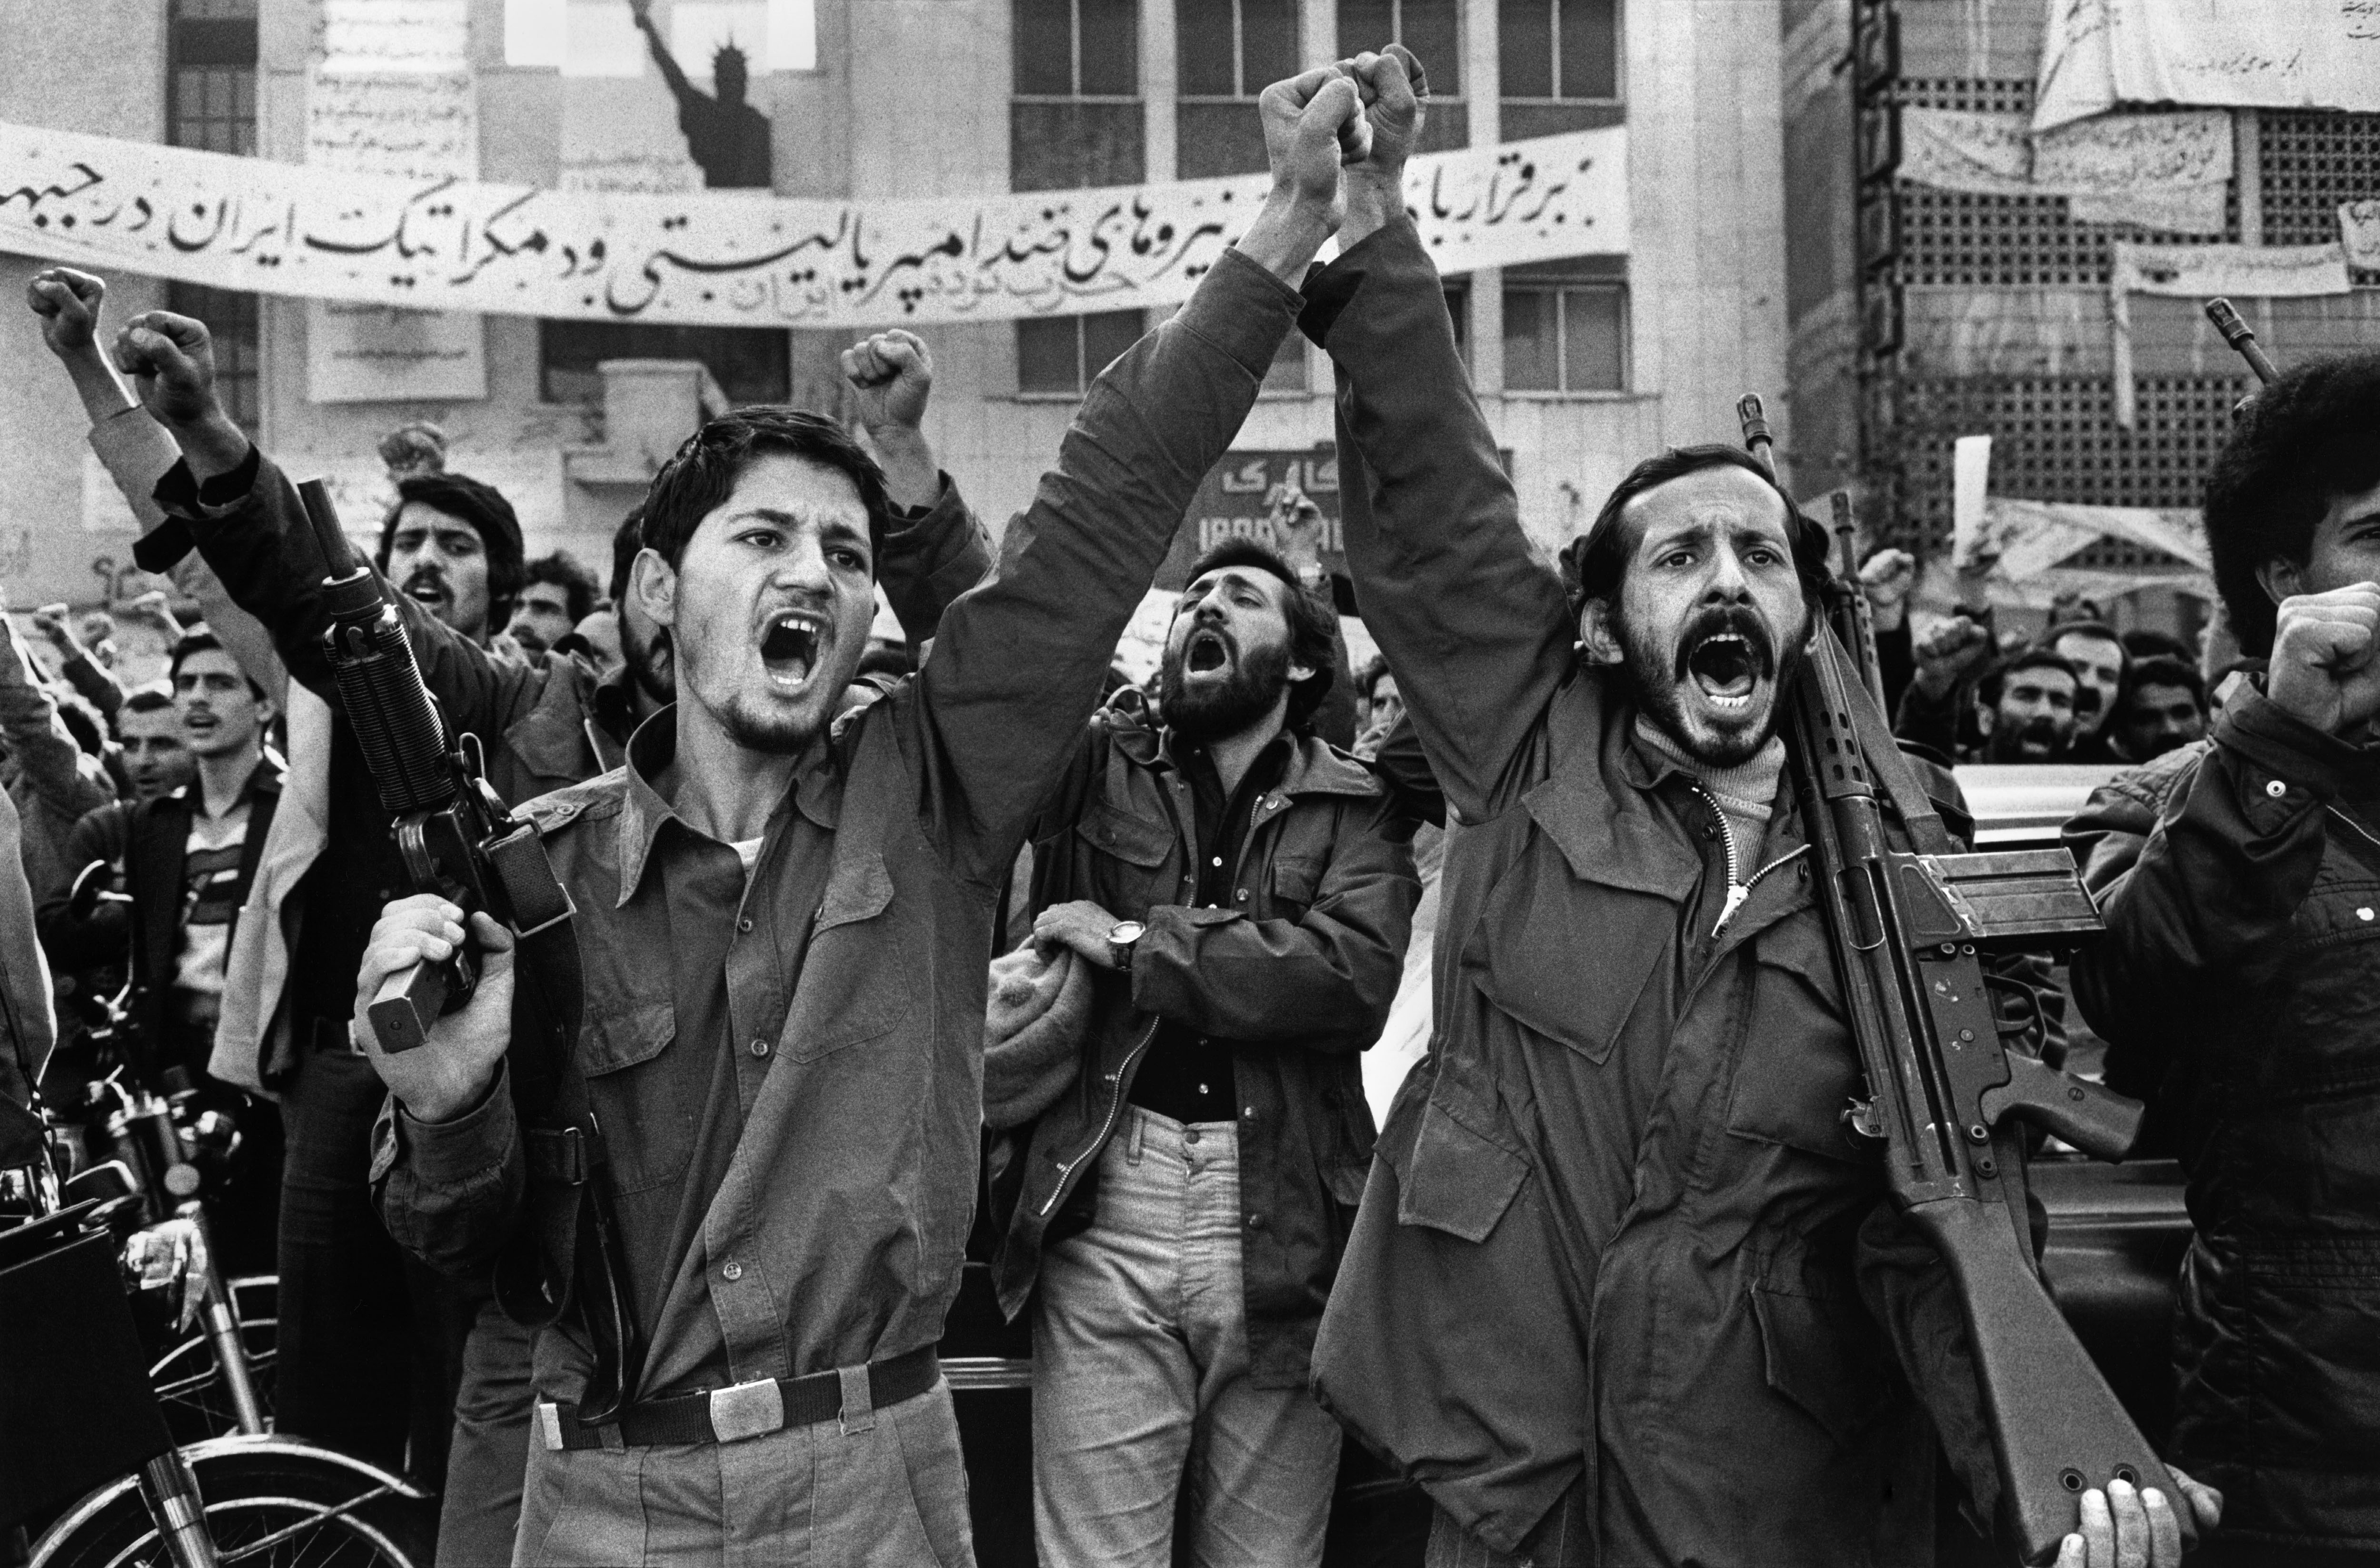 IRAN. Tehran. Armed militants outside the United States Embassy, where diplomats are held hostage since Nov. 4th, 1979. In the background is a banner with the American Statue of Liberty.